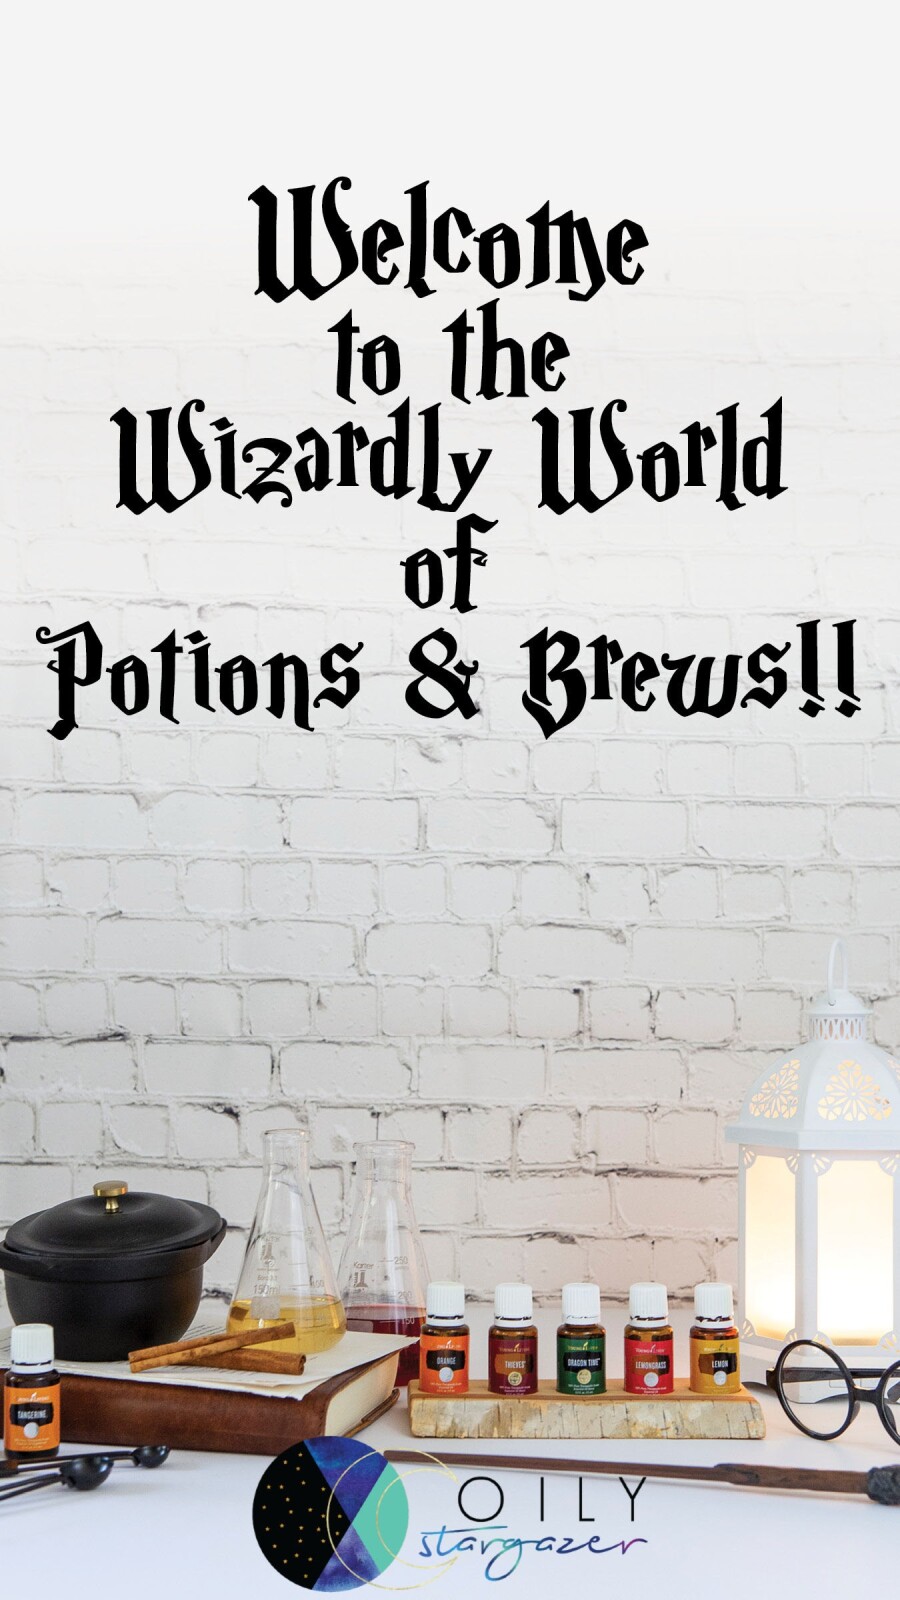 Wizardly World of Potions & Brews